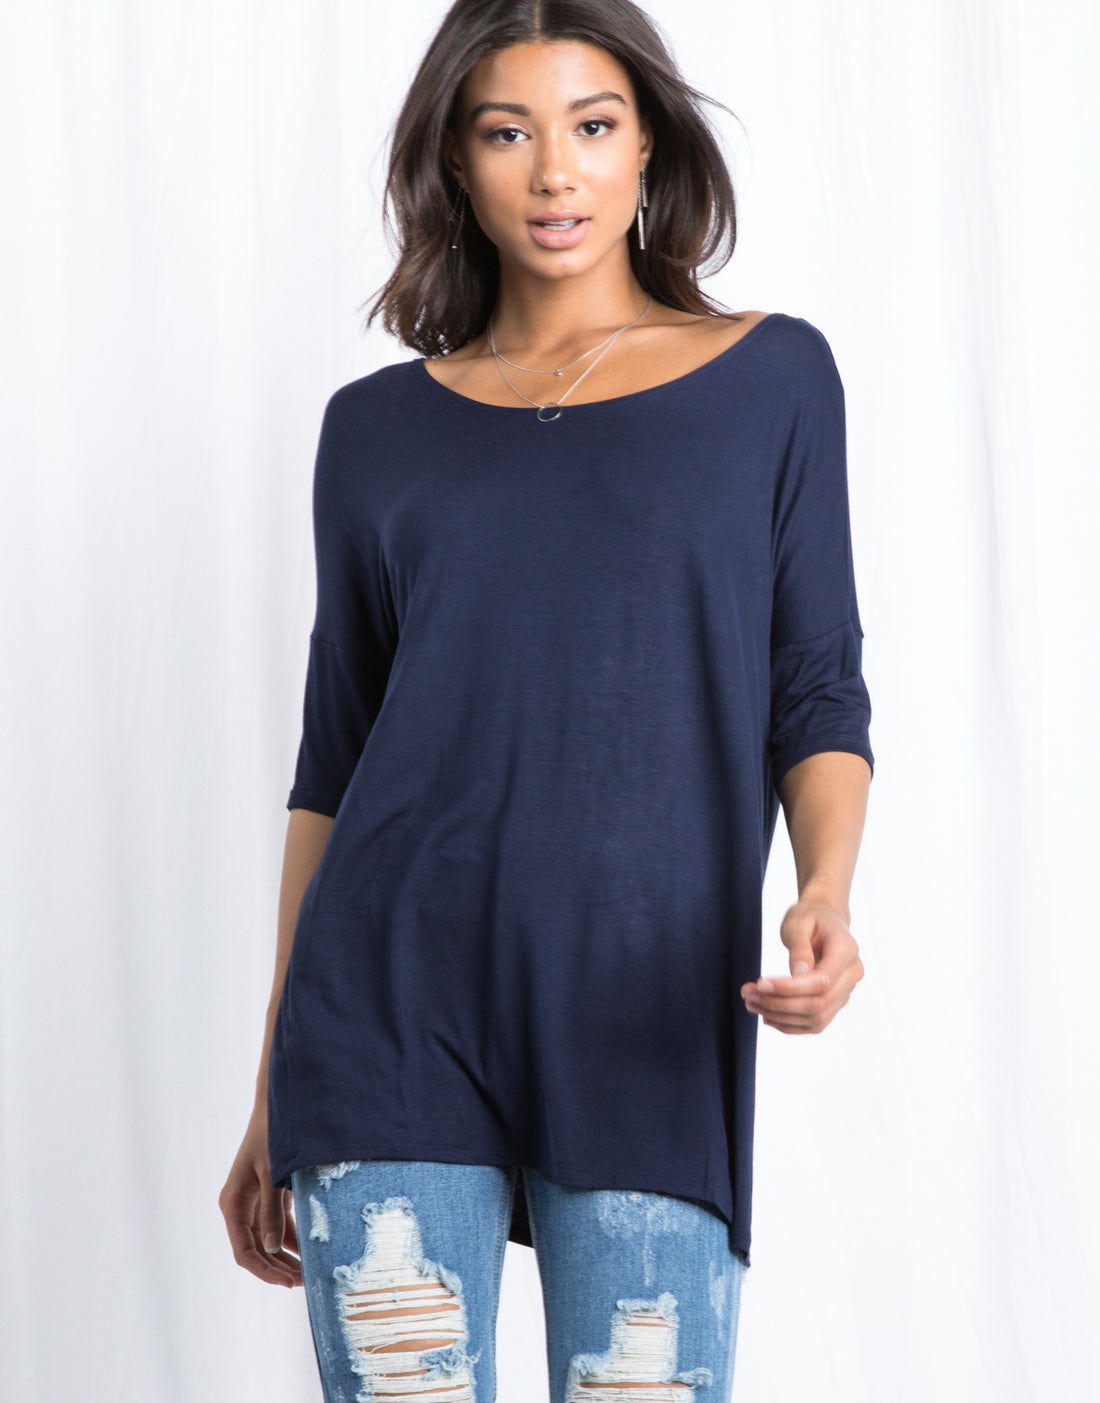 Second Skin Oversized Tee Tops Navy Small -2020AVE